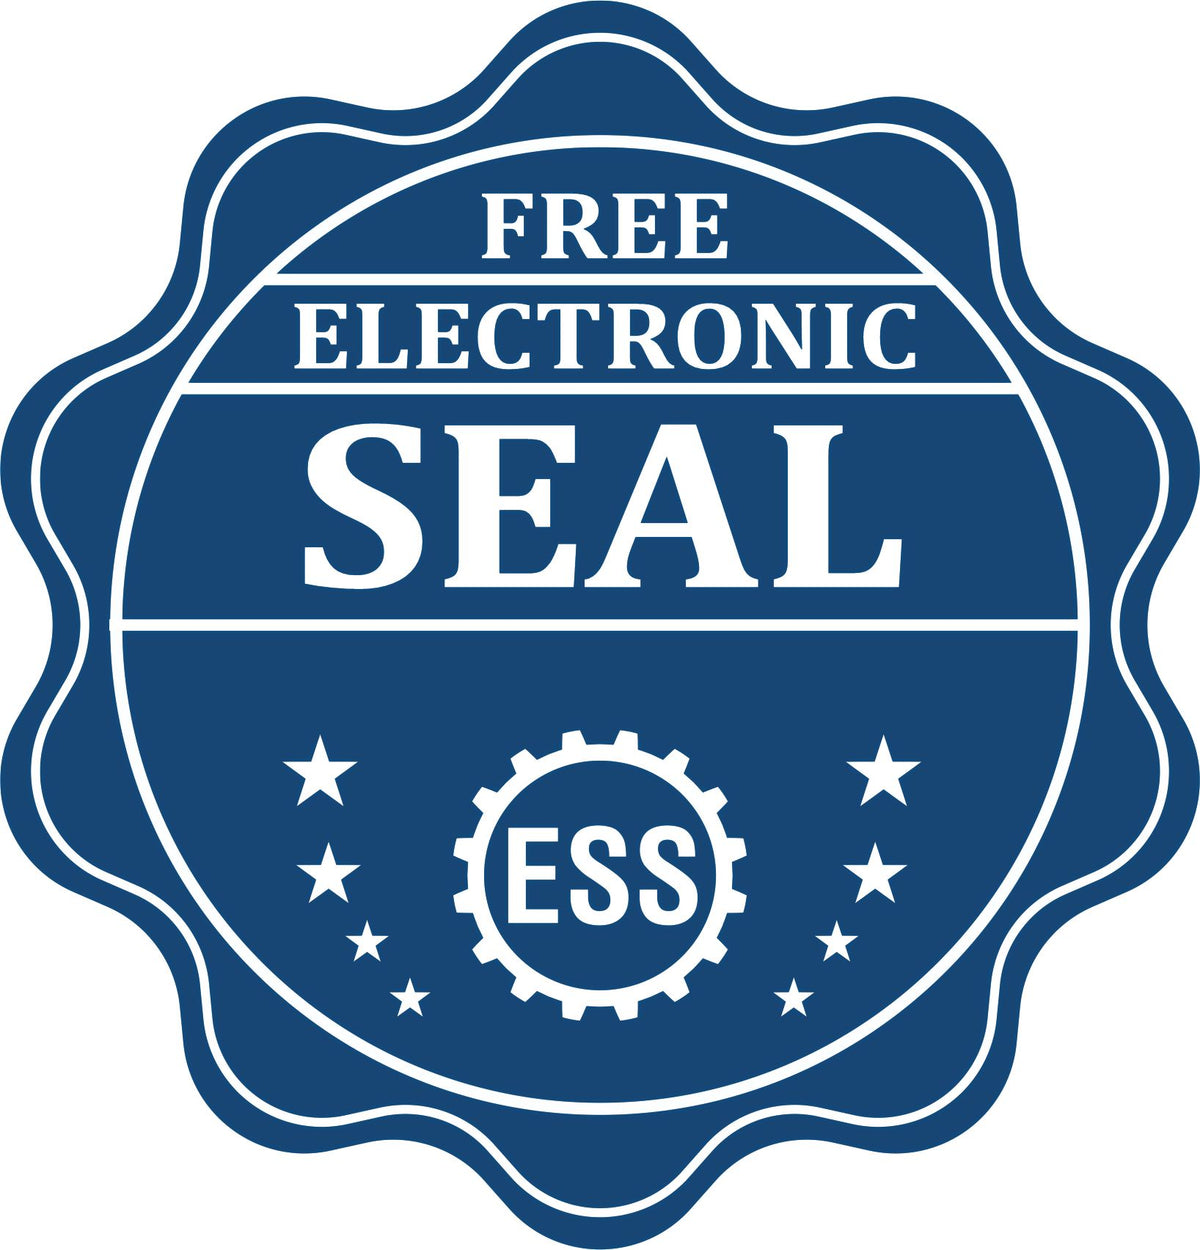 A badge showing a free electronic seal for the Soft Pocket District of Columbia Landscape Architect Embosser with stars and the ESS gear on the emblem.